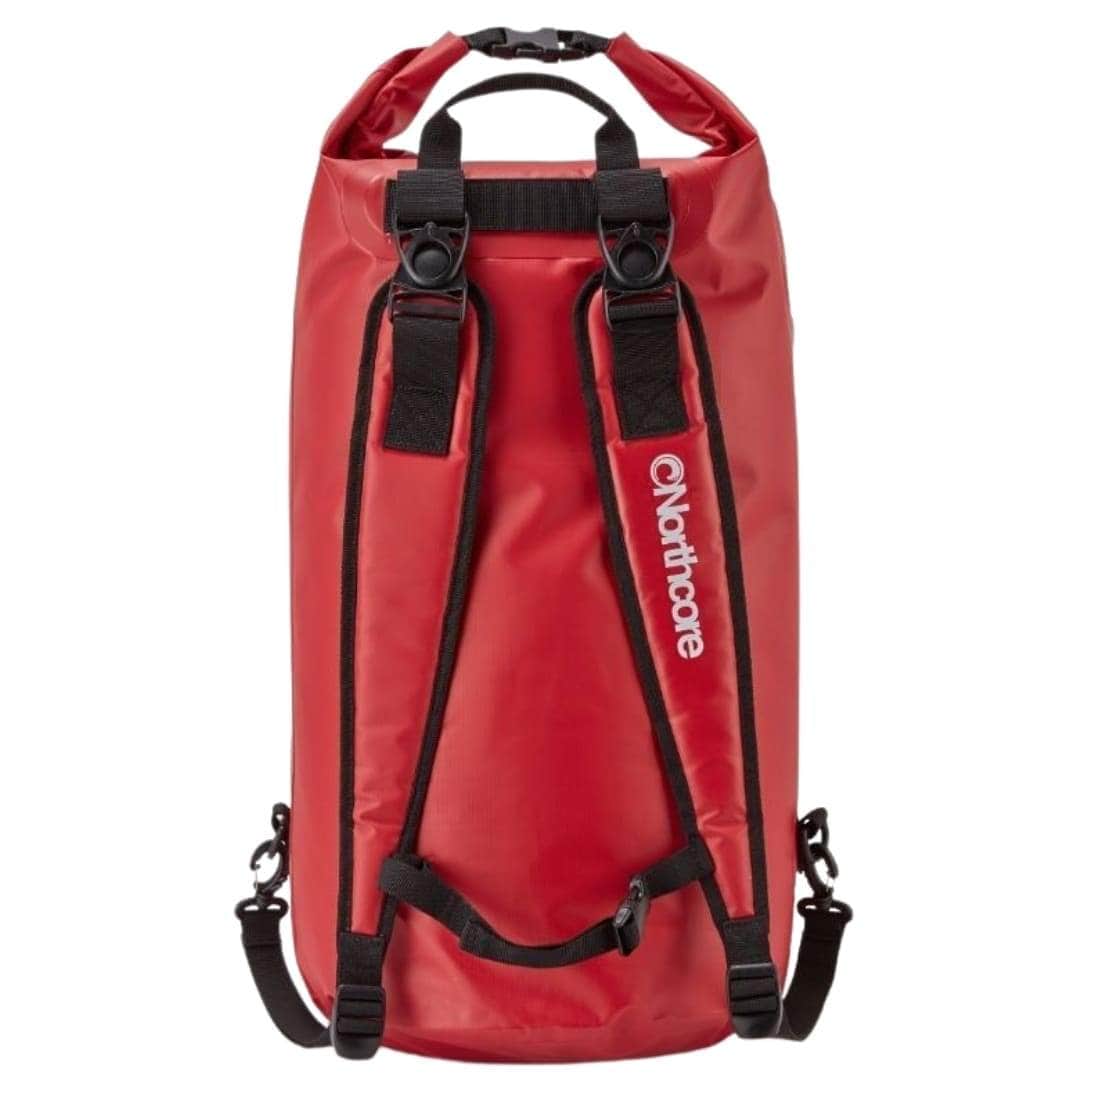 Northcore 20L Dry Bag Backpack - Red